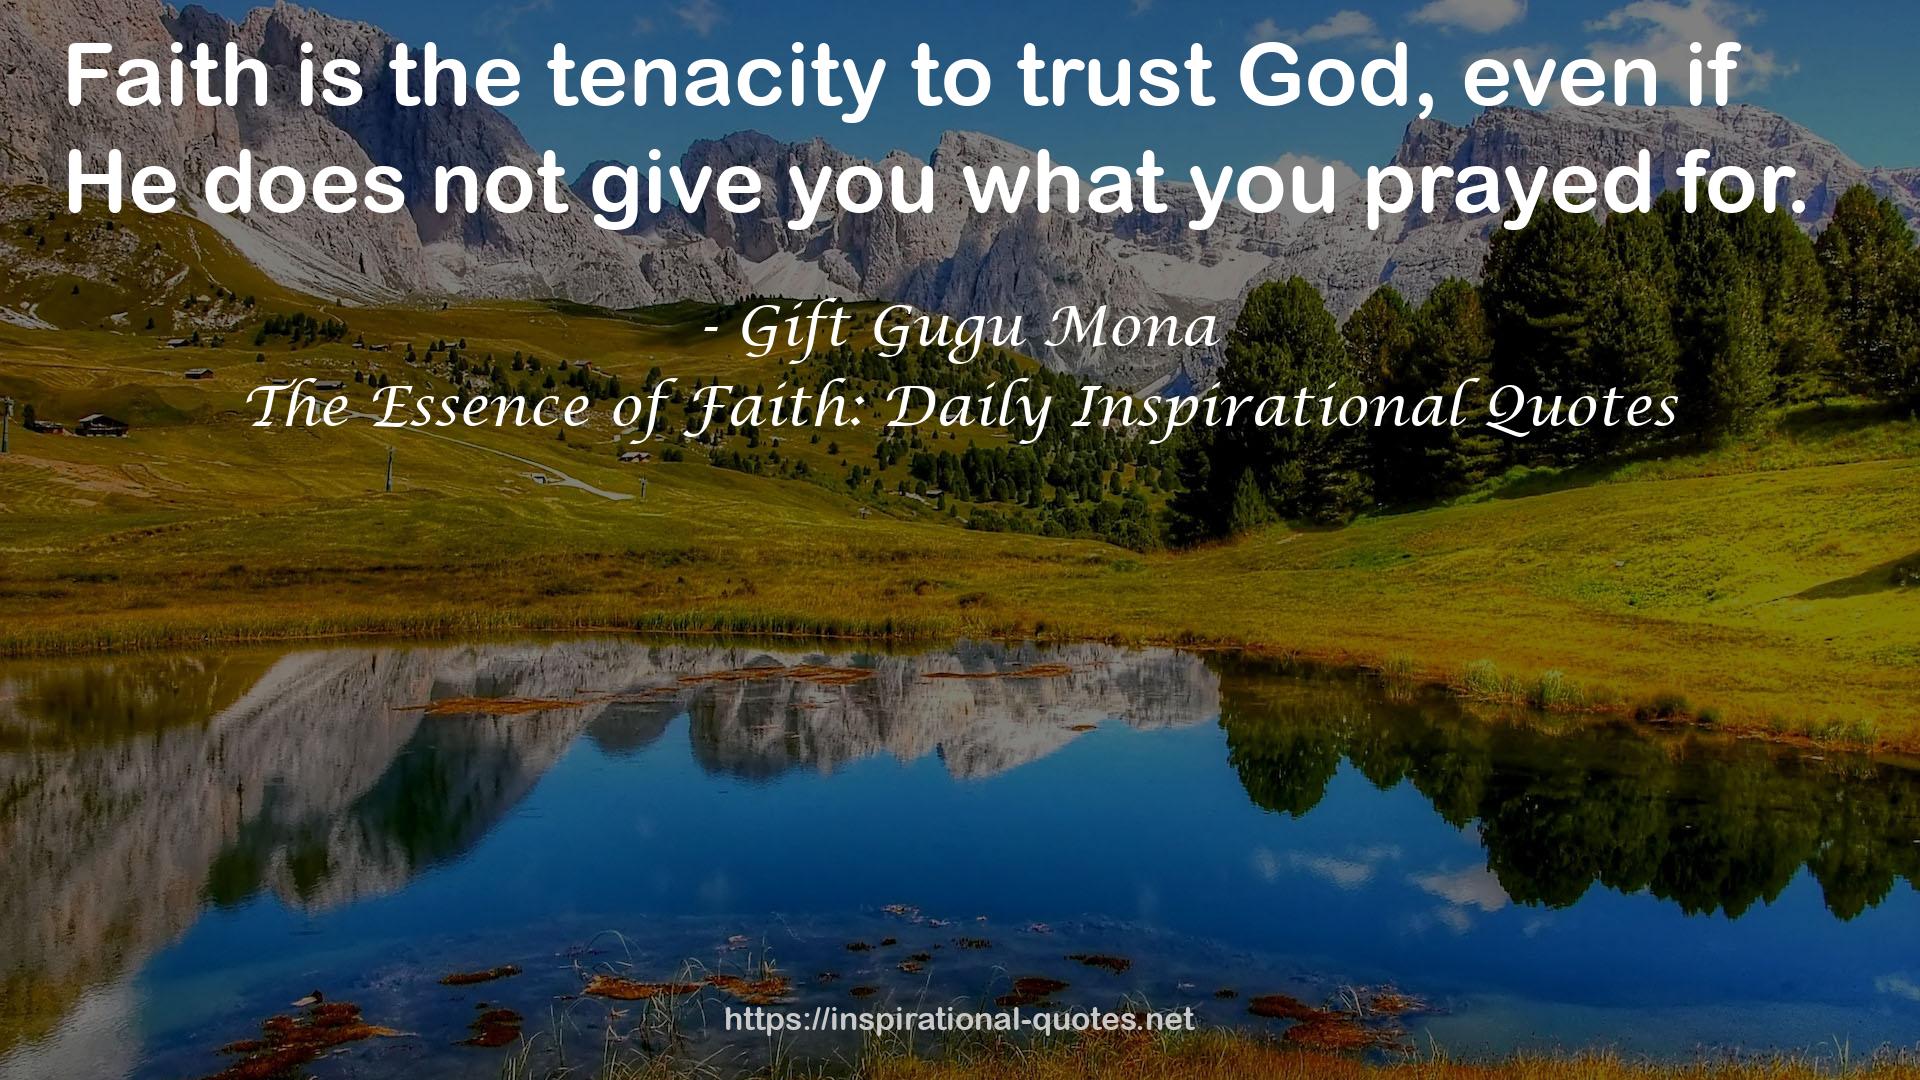 The Essence of Faith: Daily Inspirational Quotes QUOTES